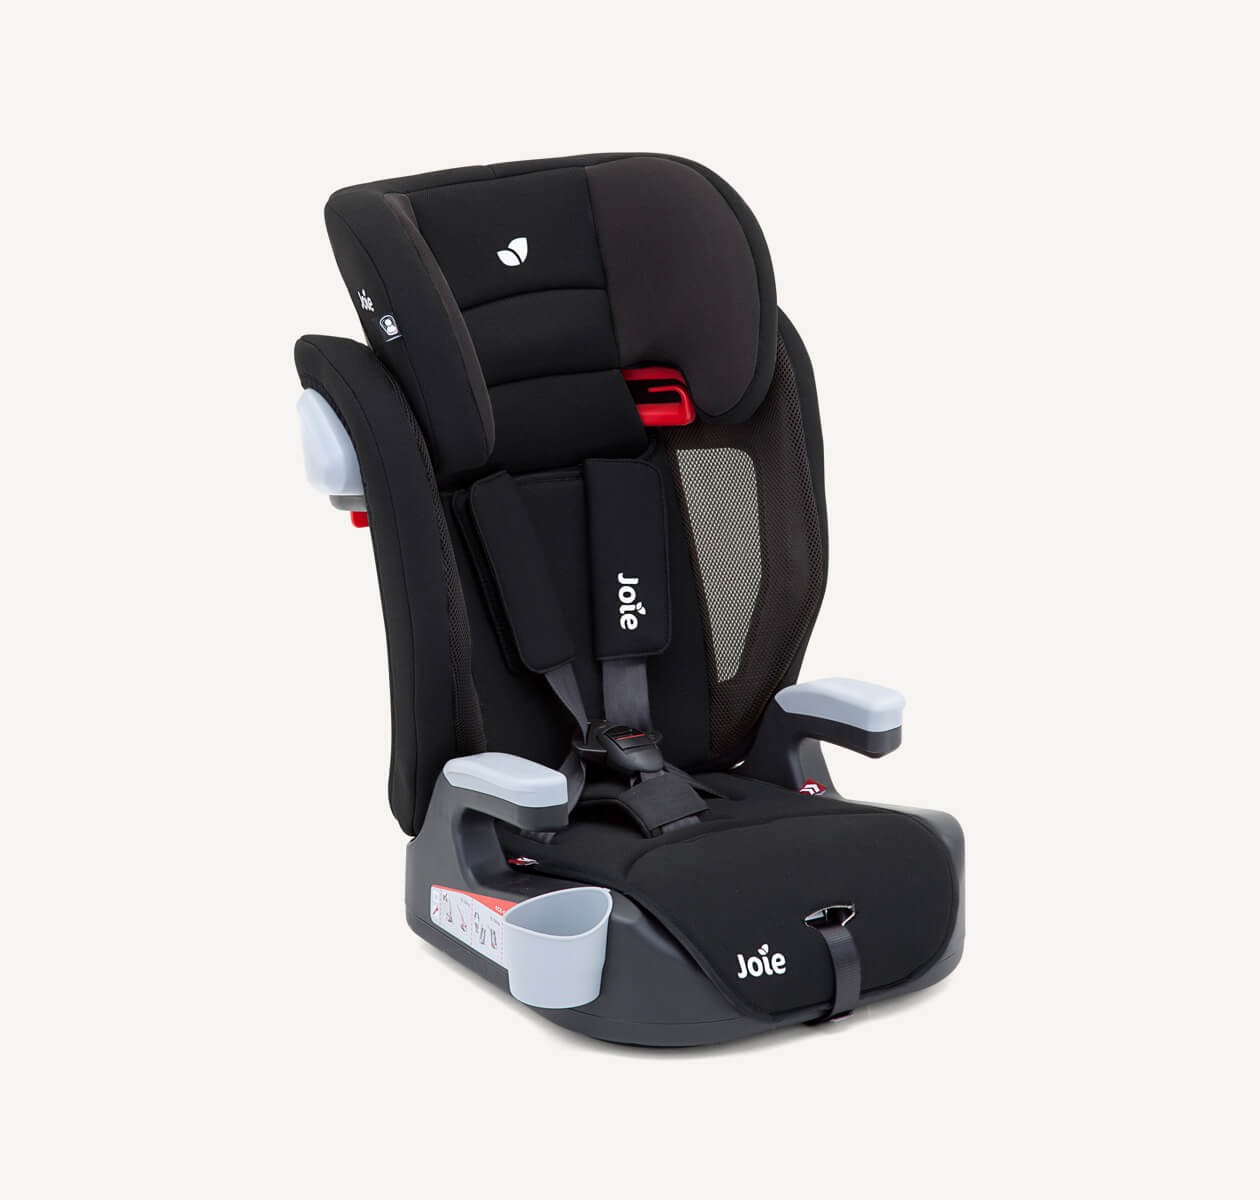 Joie booster car seat Elevate in black at an angle. 